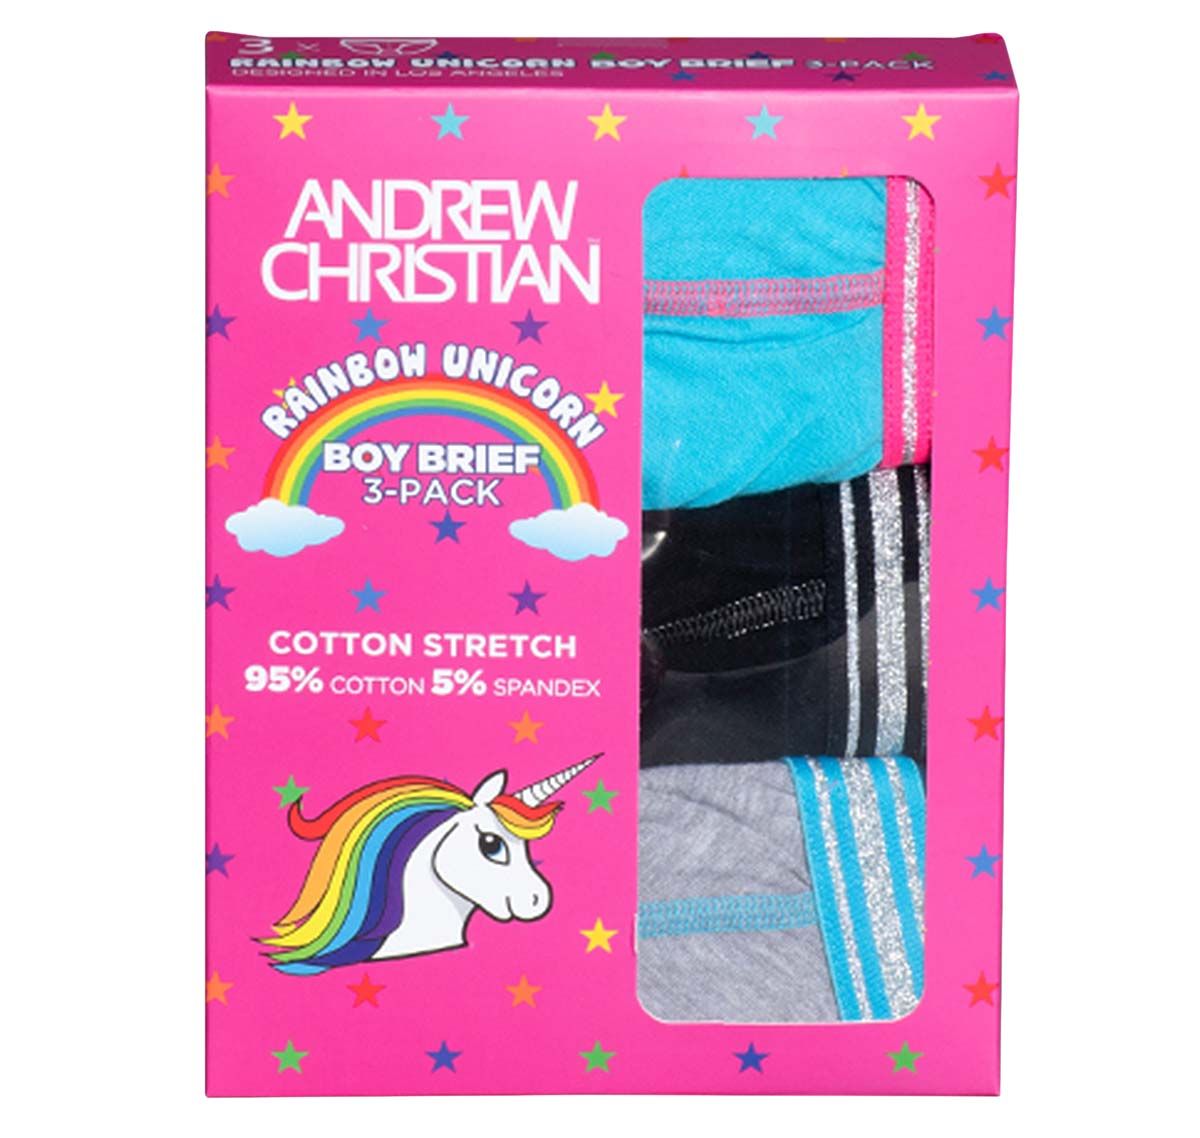 Andrew Christian 3 Pack Briefs BOY BRIEF UNICORN 3-PACK w/Almost Naked 91440, black/blue/grey